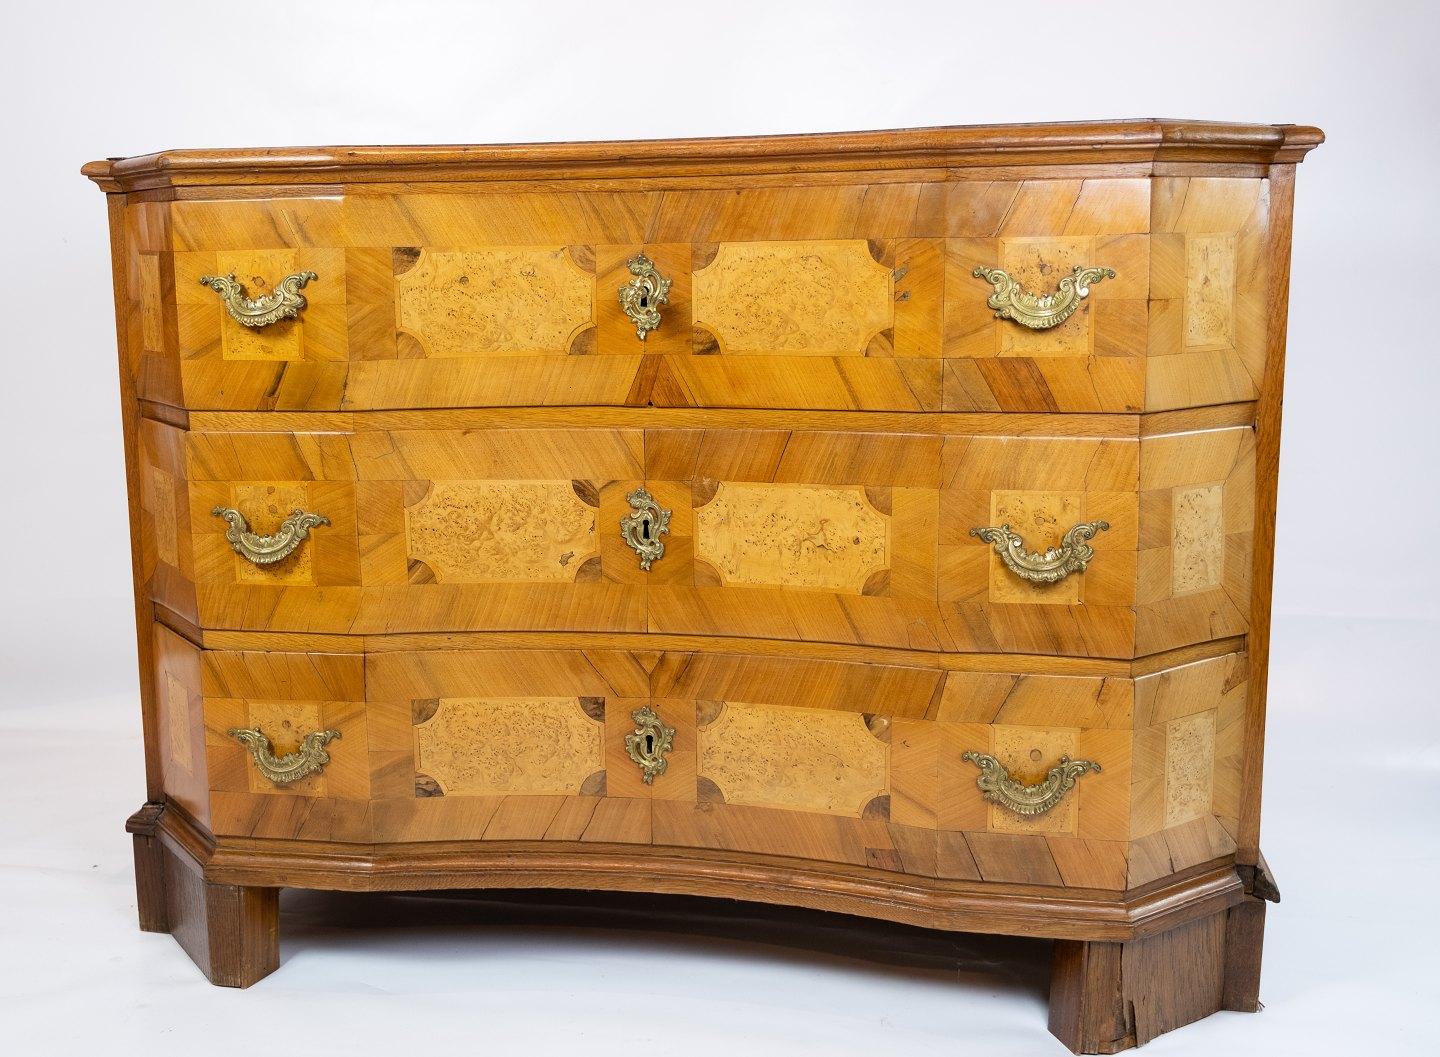 Antique chest of drawers in walnut and fruit wood decorated with brass handles from South Germany, circa 1780s. The chest is in great antique condition.
  